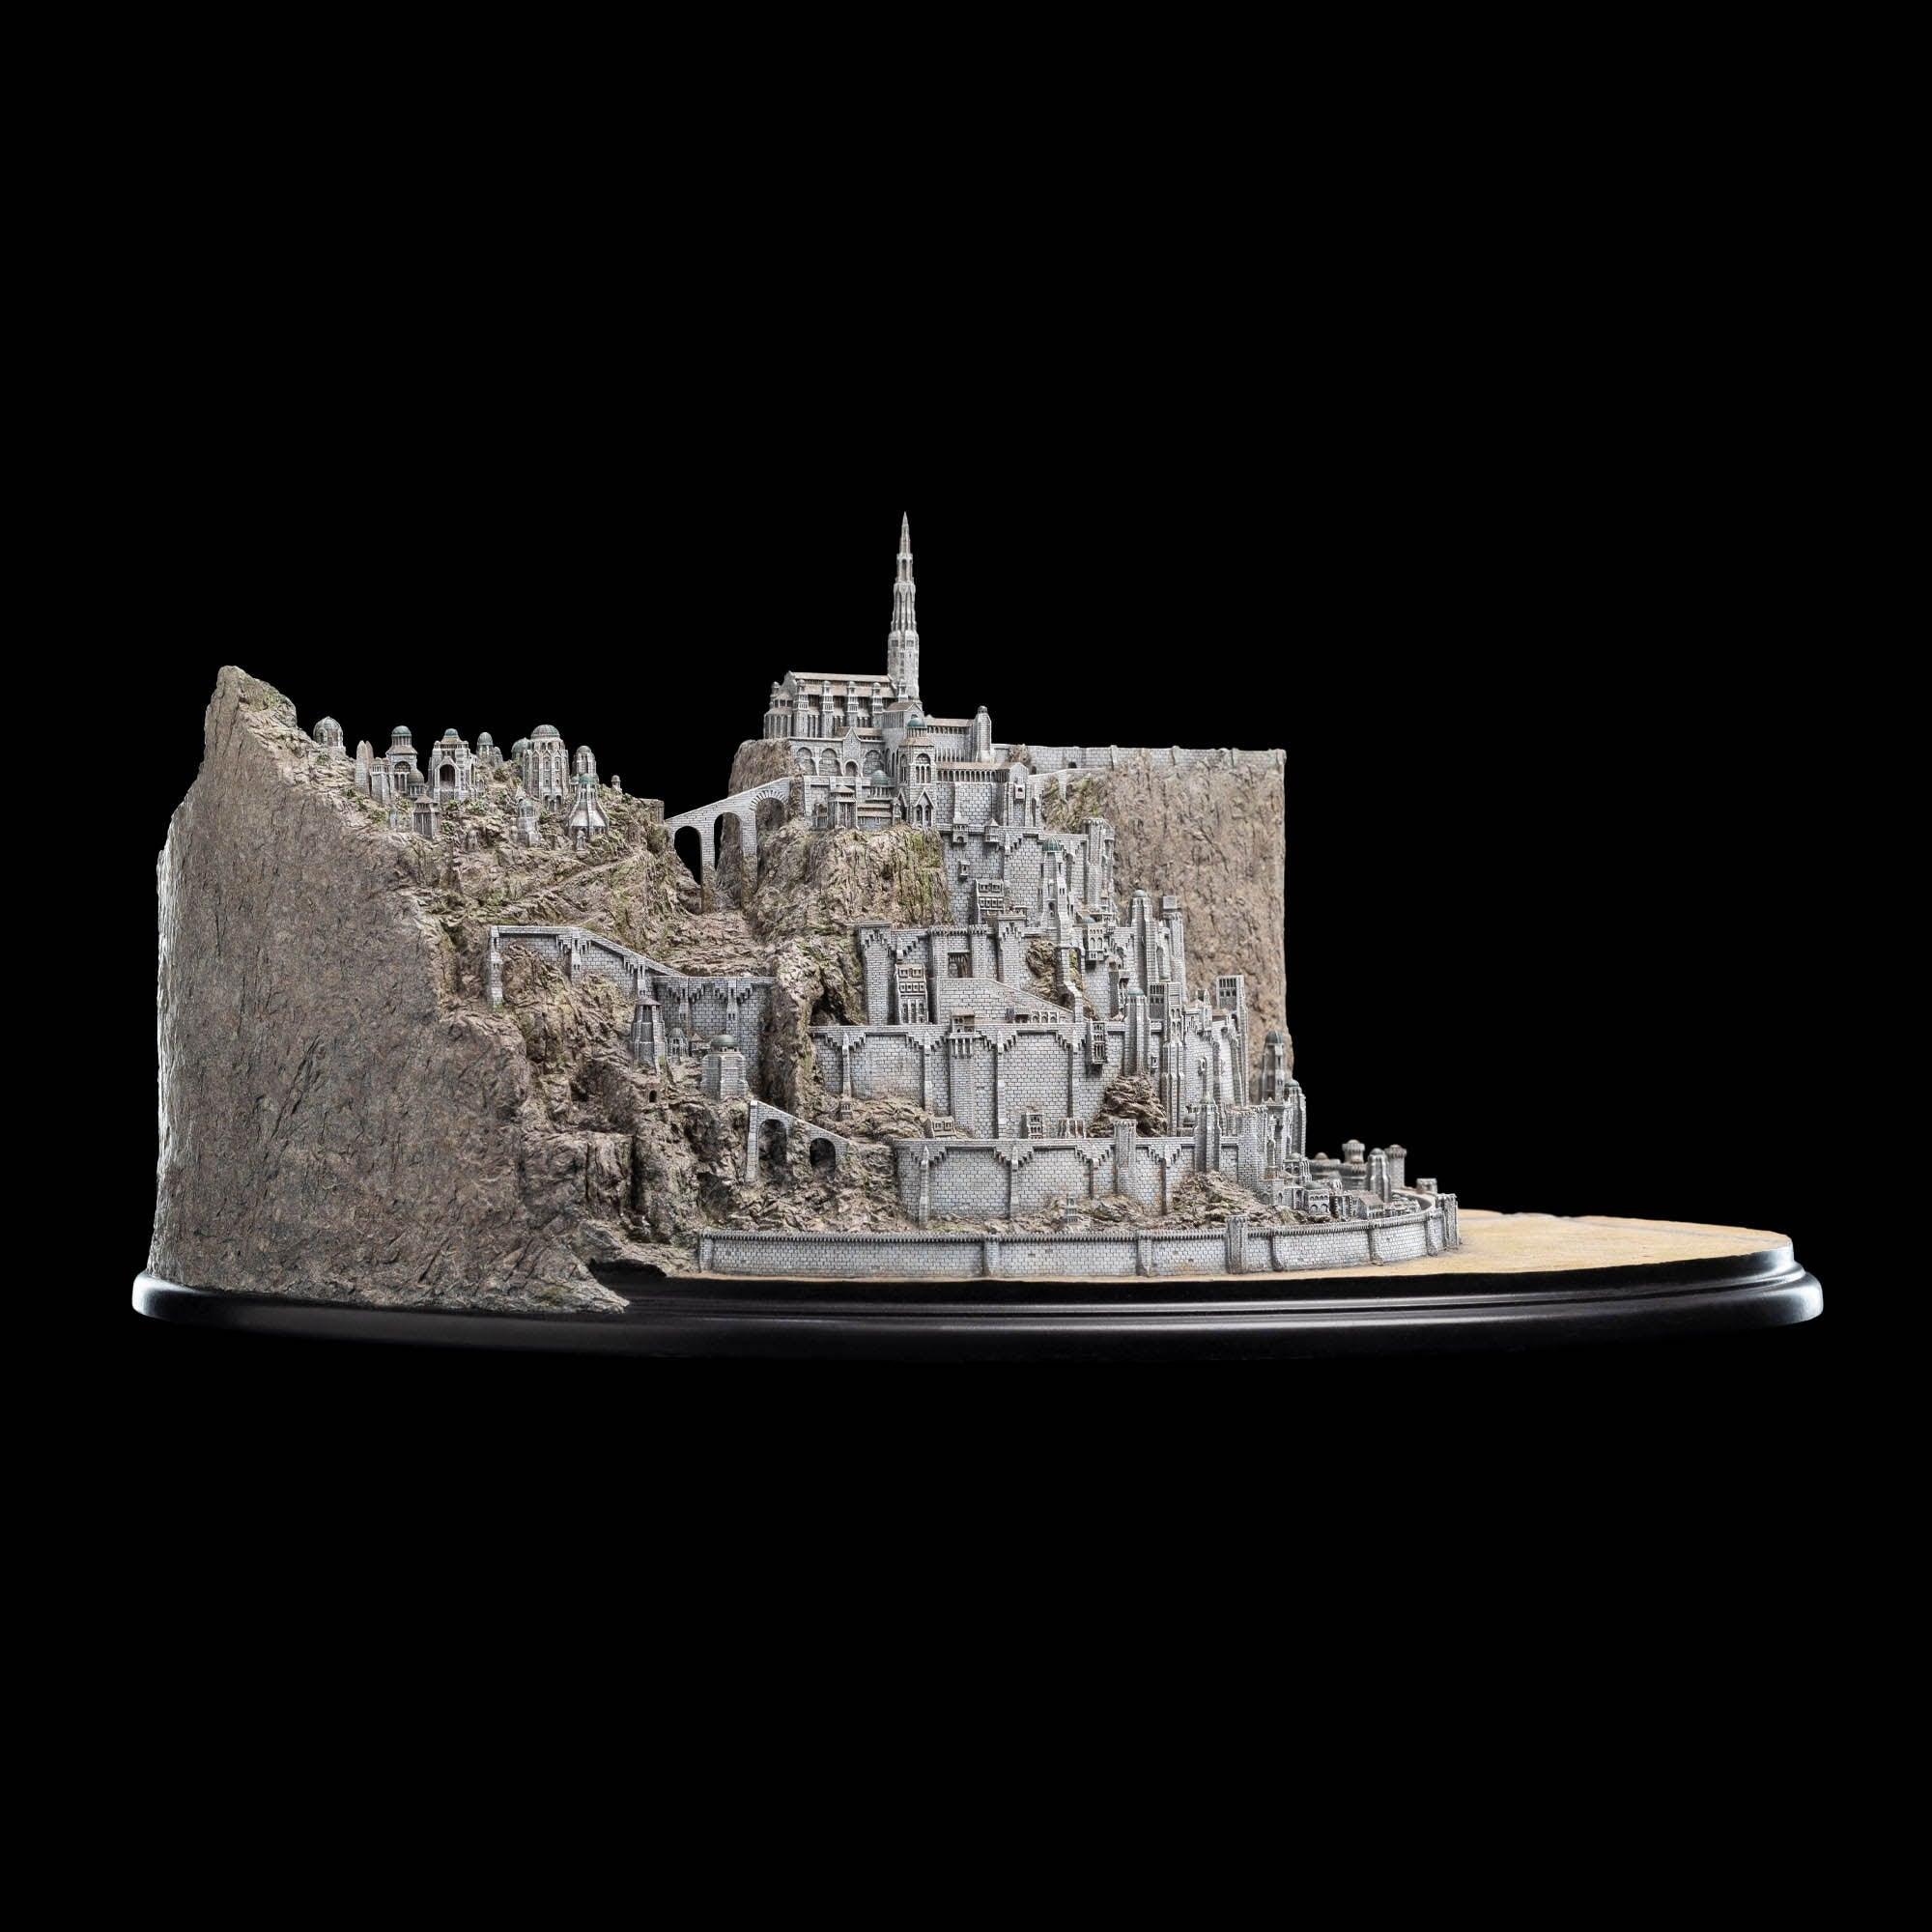 WET01463 The Lord of the Rings - Minas Tirith Environment - Weta Workshop - Titan Pop Culture